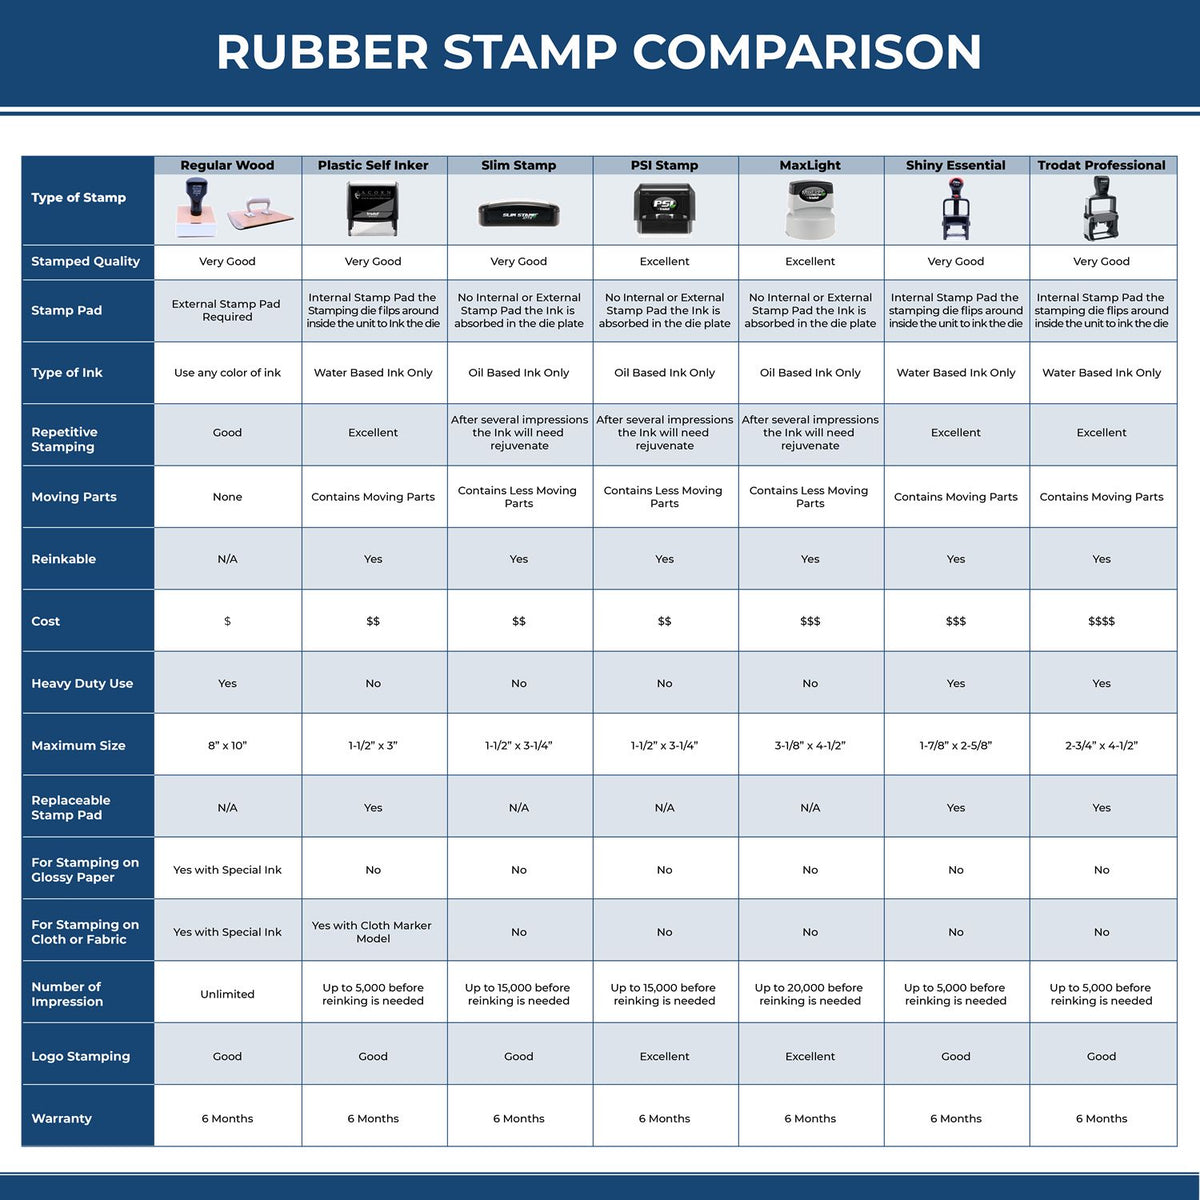 A comparison chart for the different types of mount models available for the Heavy-Duty Montana Rectangular Notary Stamp.